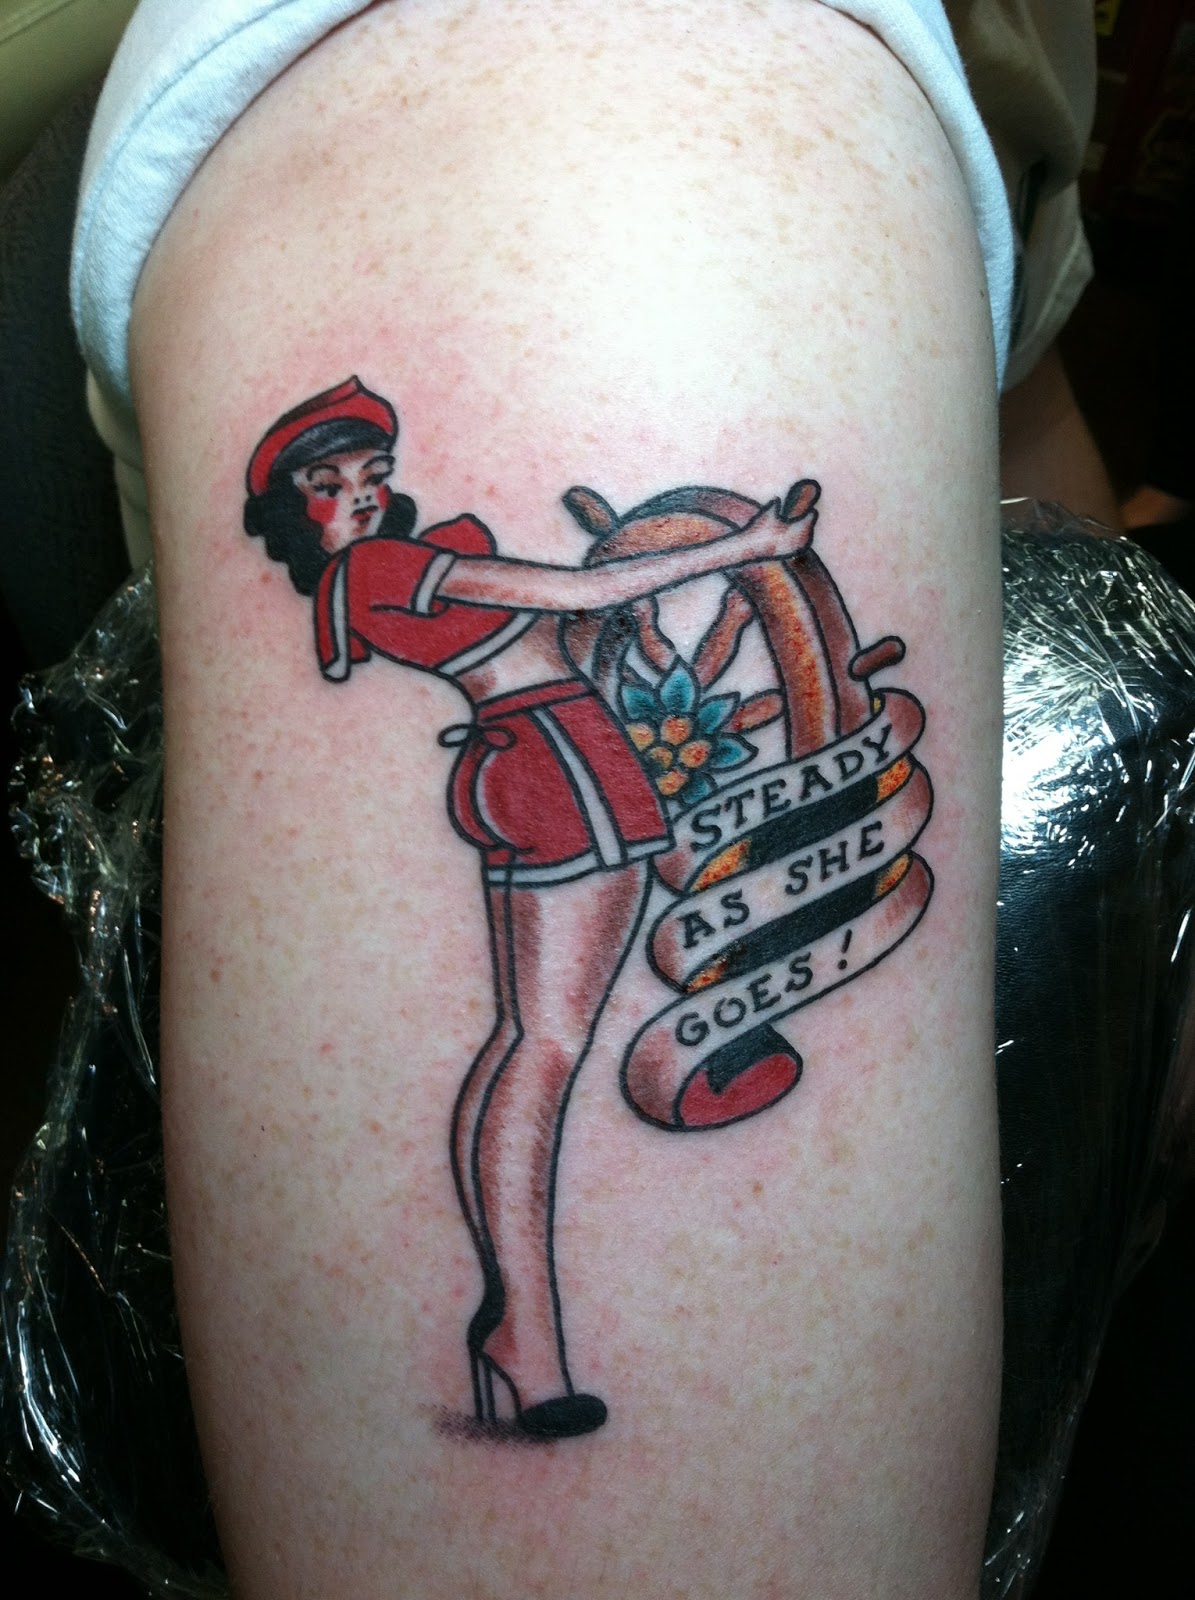 Sailor And Nautical Tattoos Designs, Ideas and Meaning | Tattoos For You